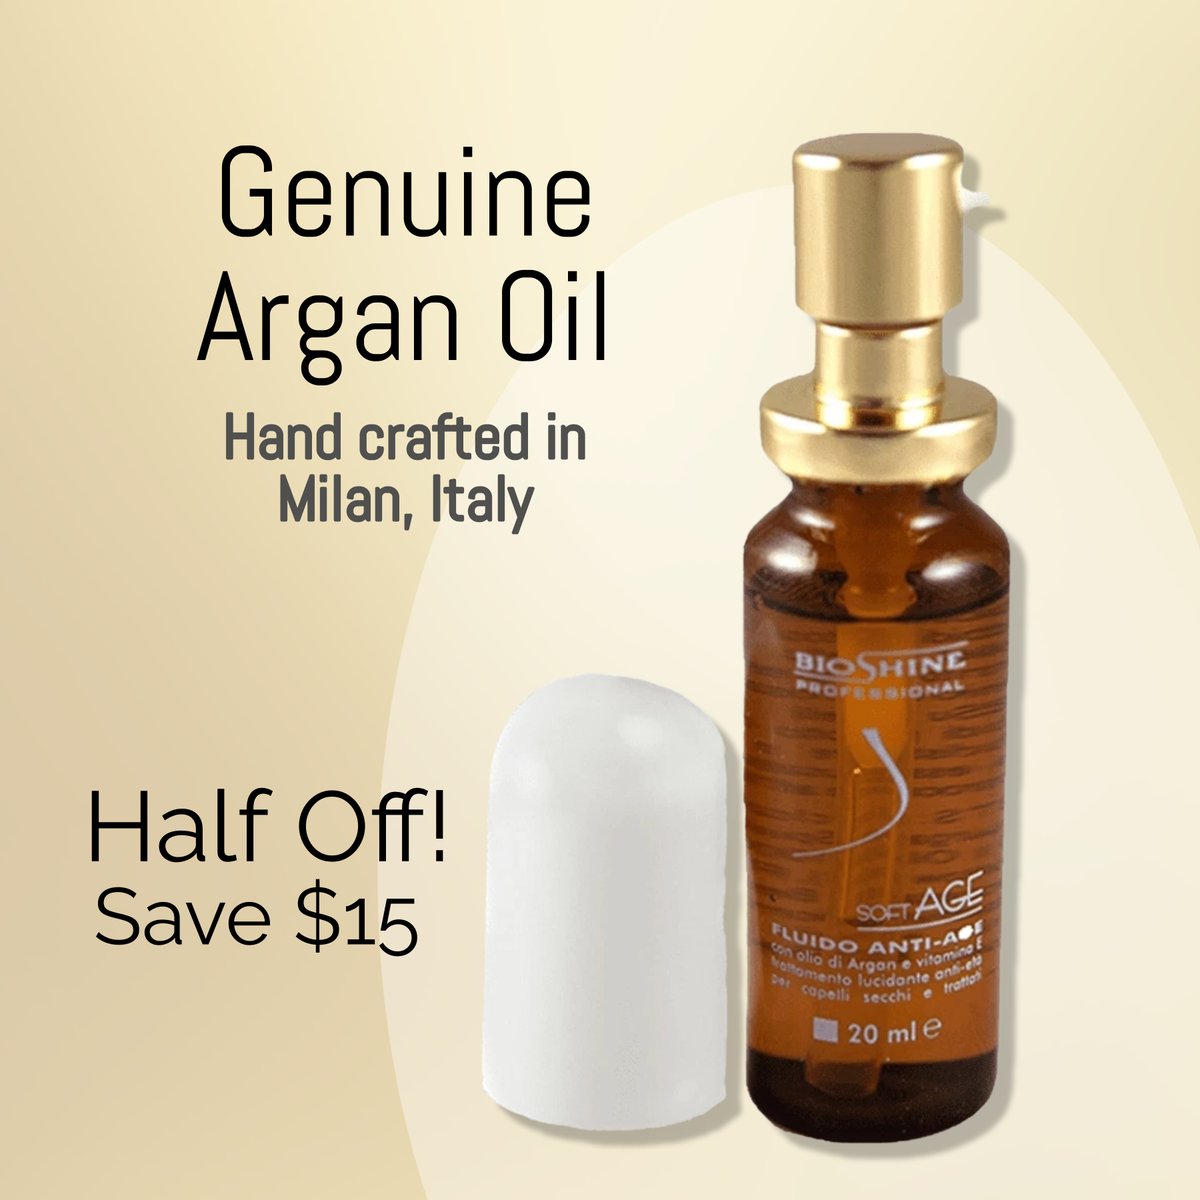 Experience the magic of Milan with JFR Genuine Argan Oil today! 
Half Off - While Supplies Last…..
justforredheads.com/jfr-argan-oil-…

#JFR #Haircare #ArganOil #MilanBeauty  #redhair #beautyproducts #jfr #justforredheadsofficial #ginger